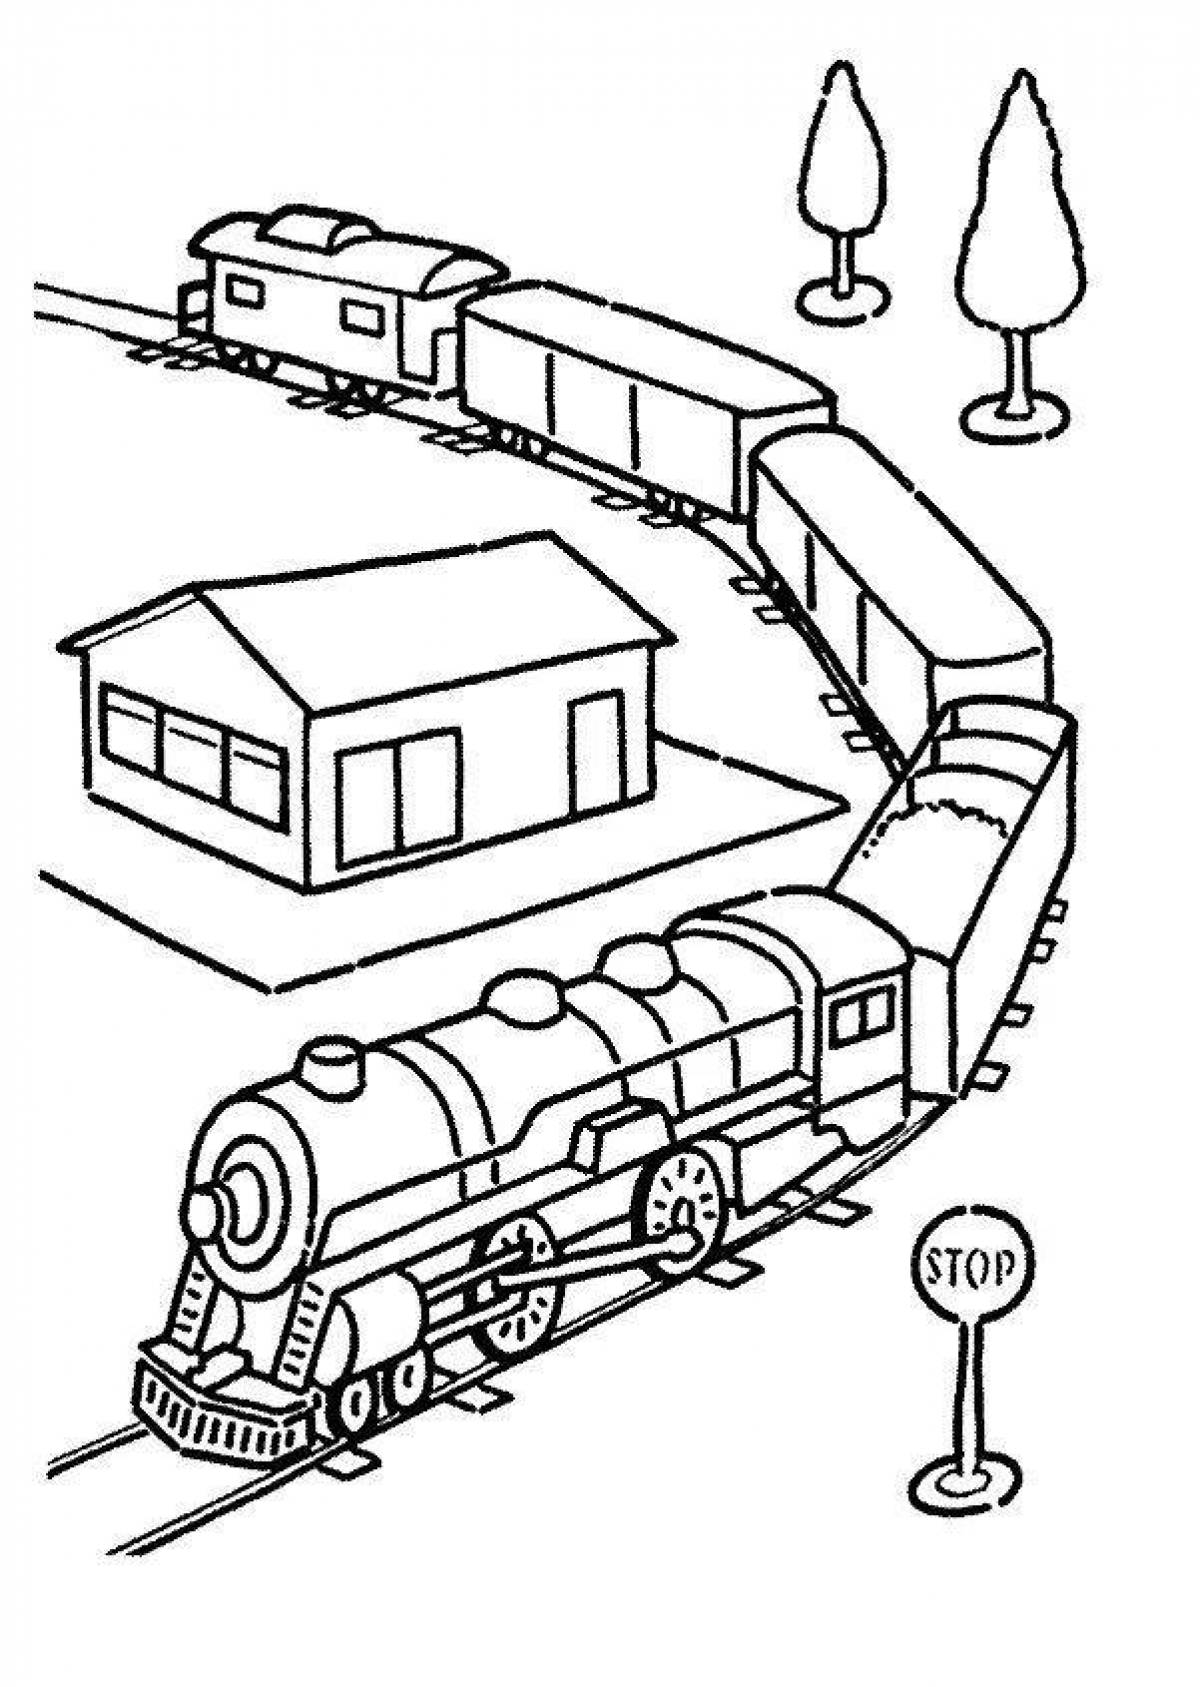 Adorable freight train coloring page